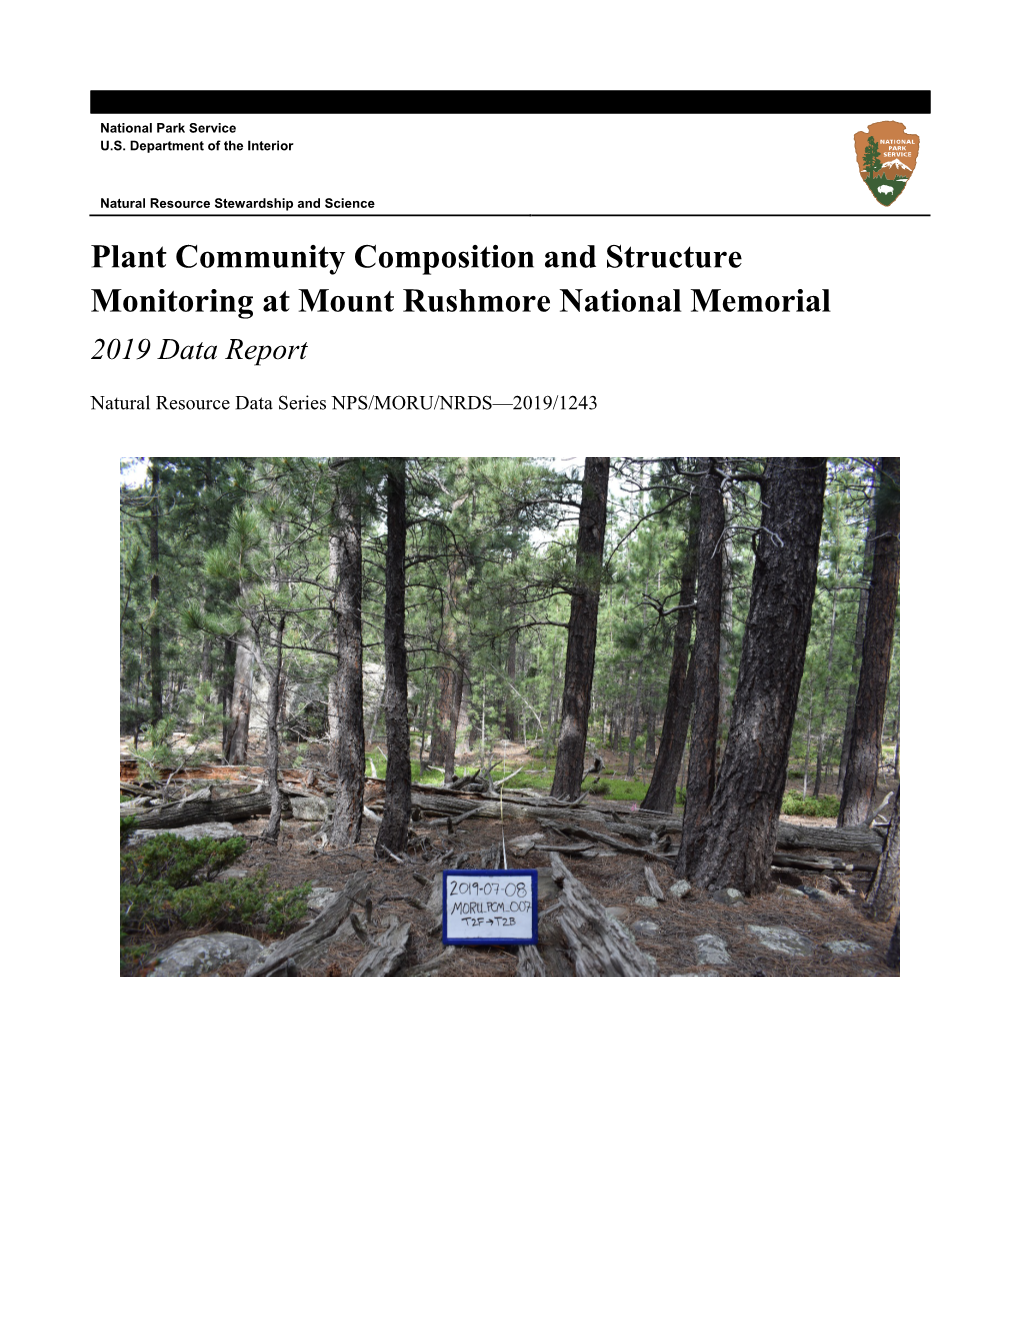 Plant Community Composition and Structure Monitoring at Mount Rushmore National Memorial 2019 Data Report